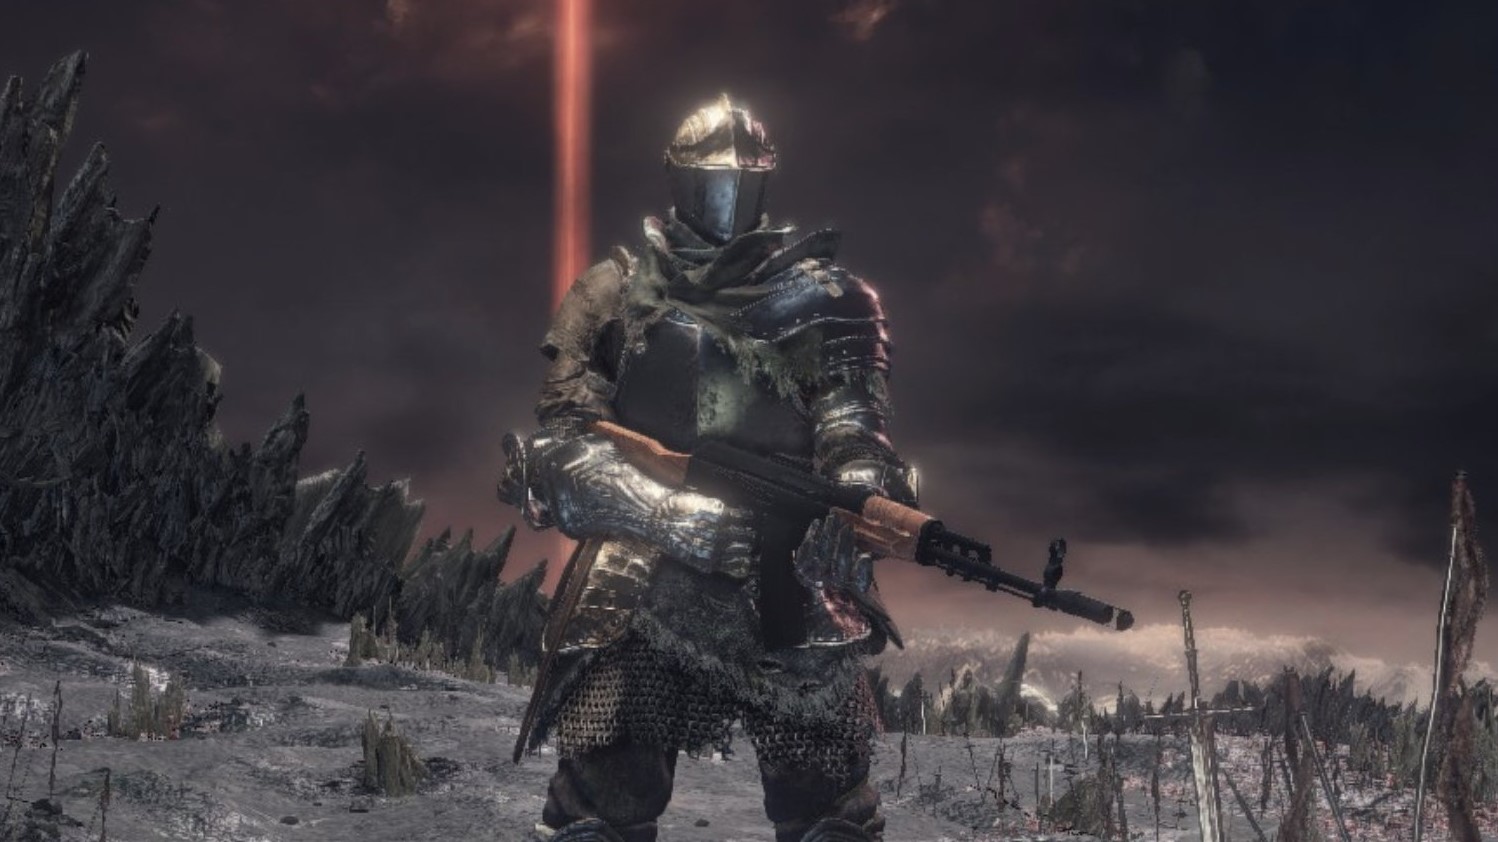 Dark Souls 3 With Assault Rifles Is My New Favorite Easy Mode Pc Gamer